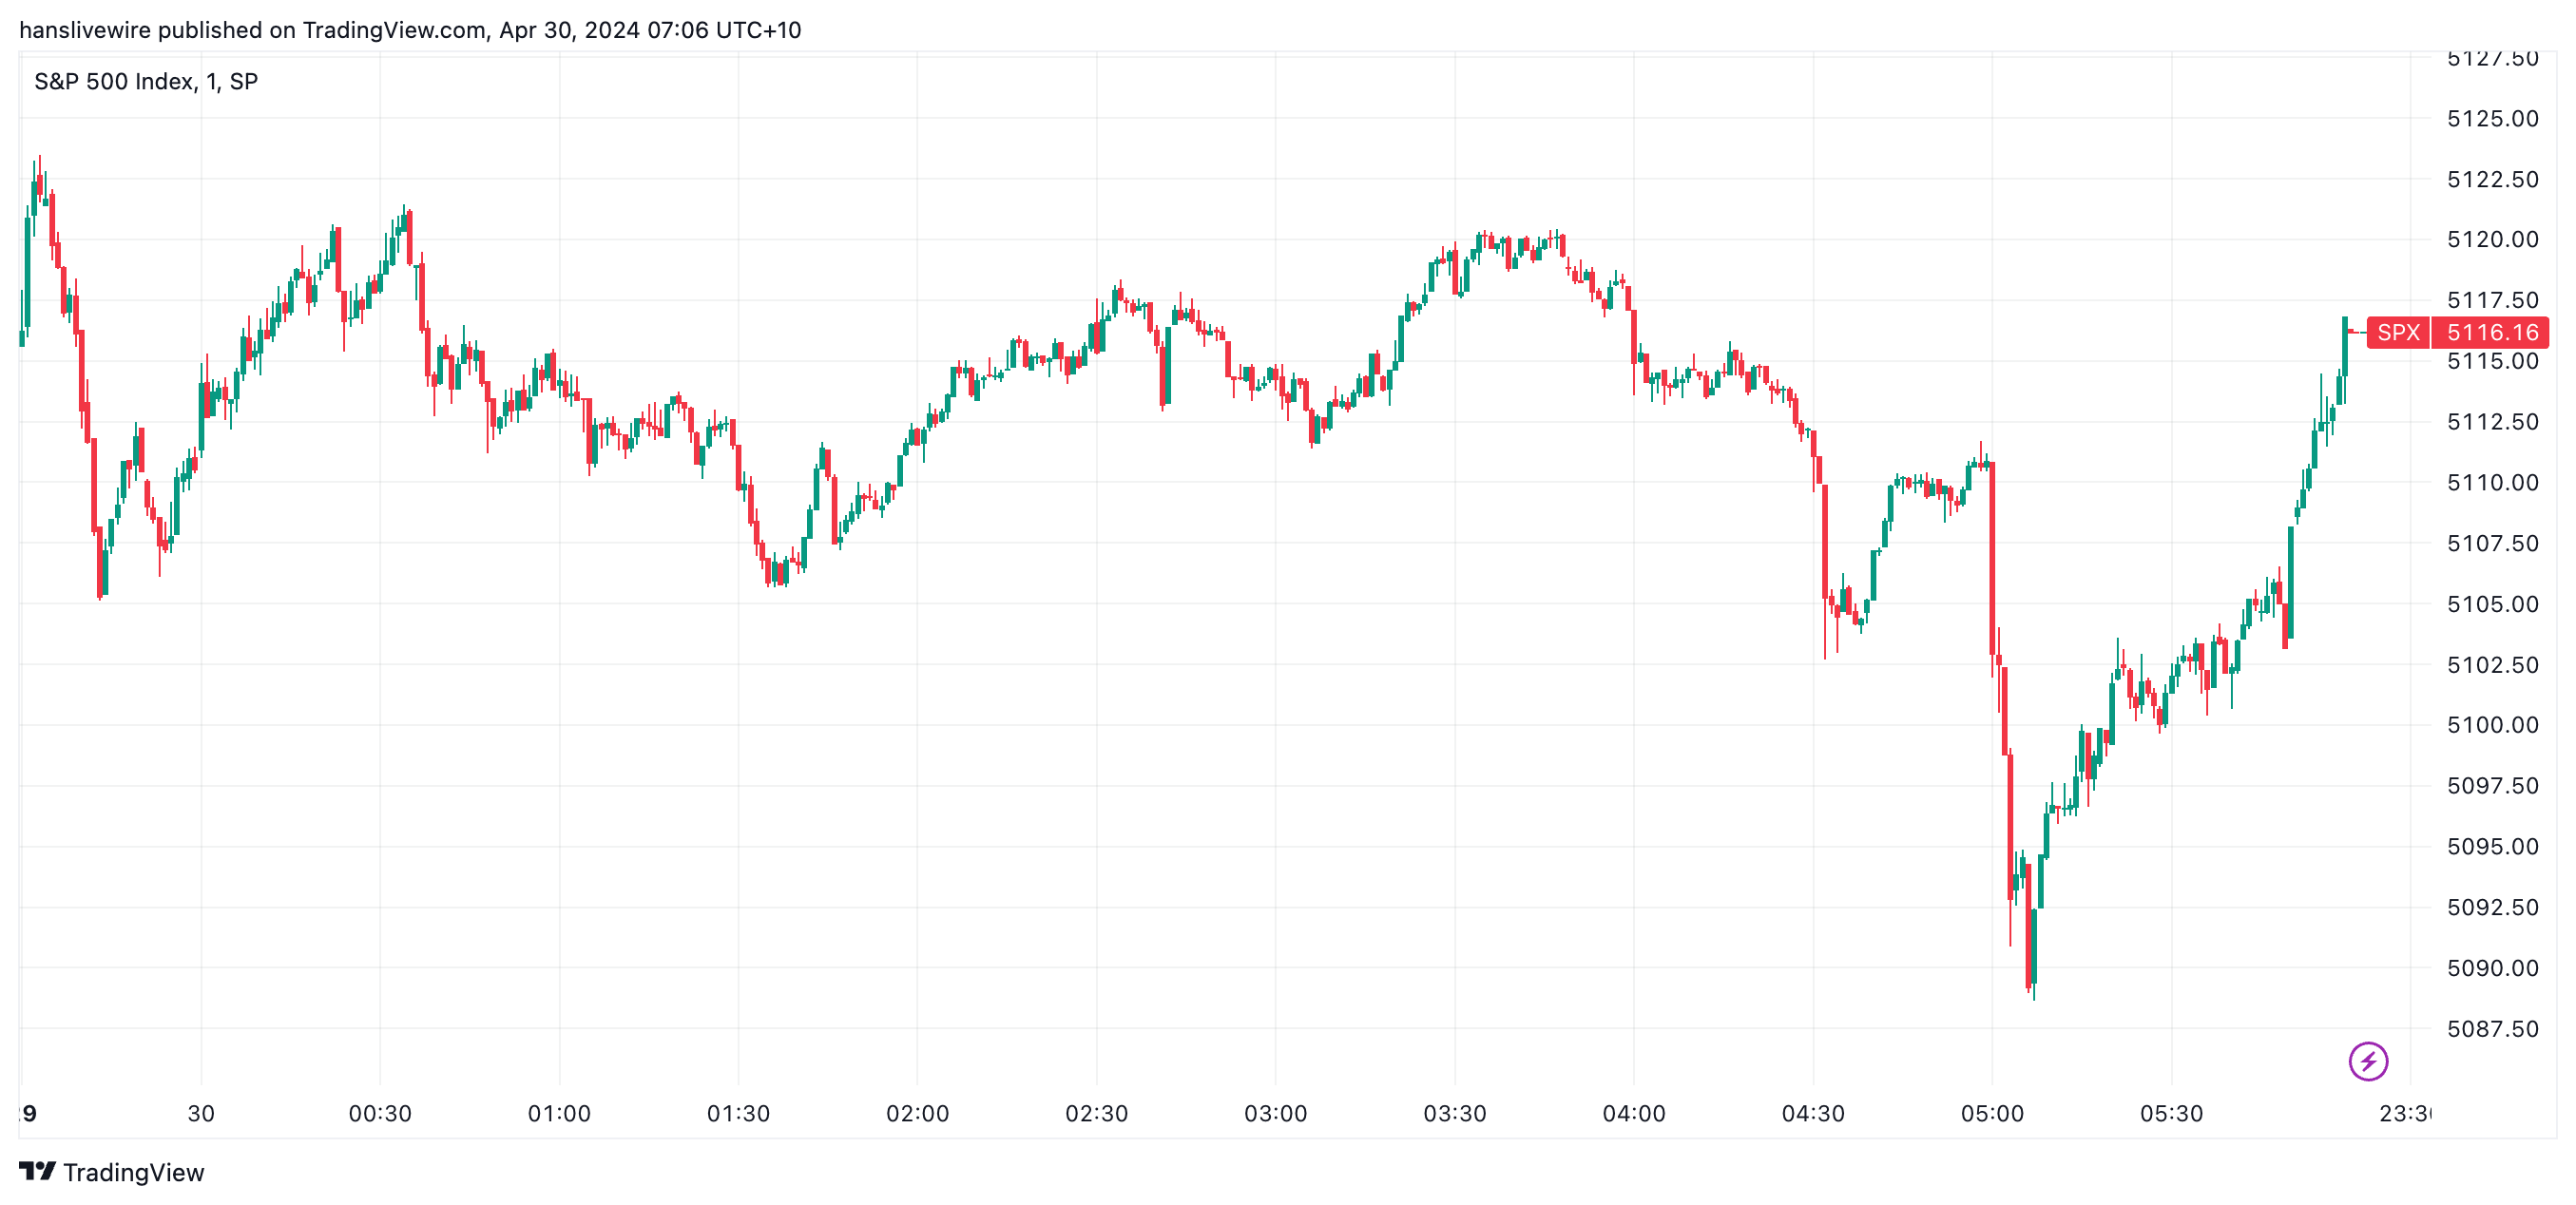 S&P 500 finishes higher after a volatile final hour. (Source: TradingView)